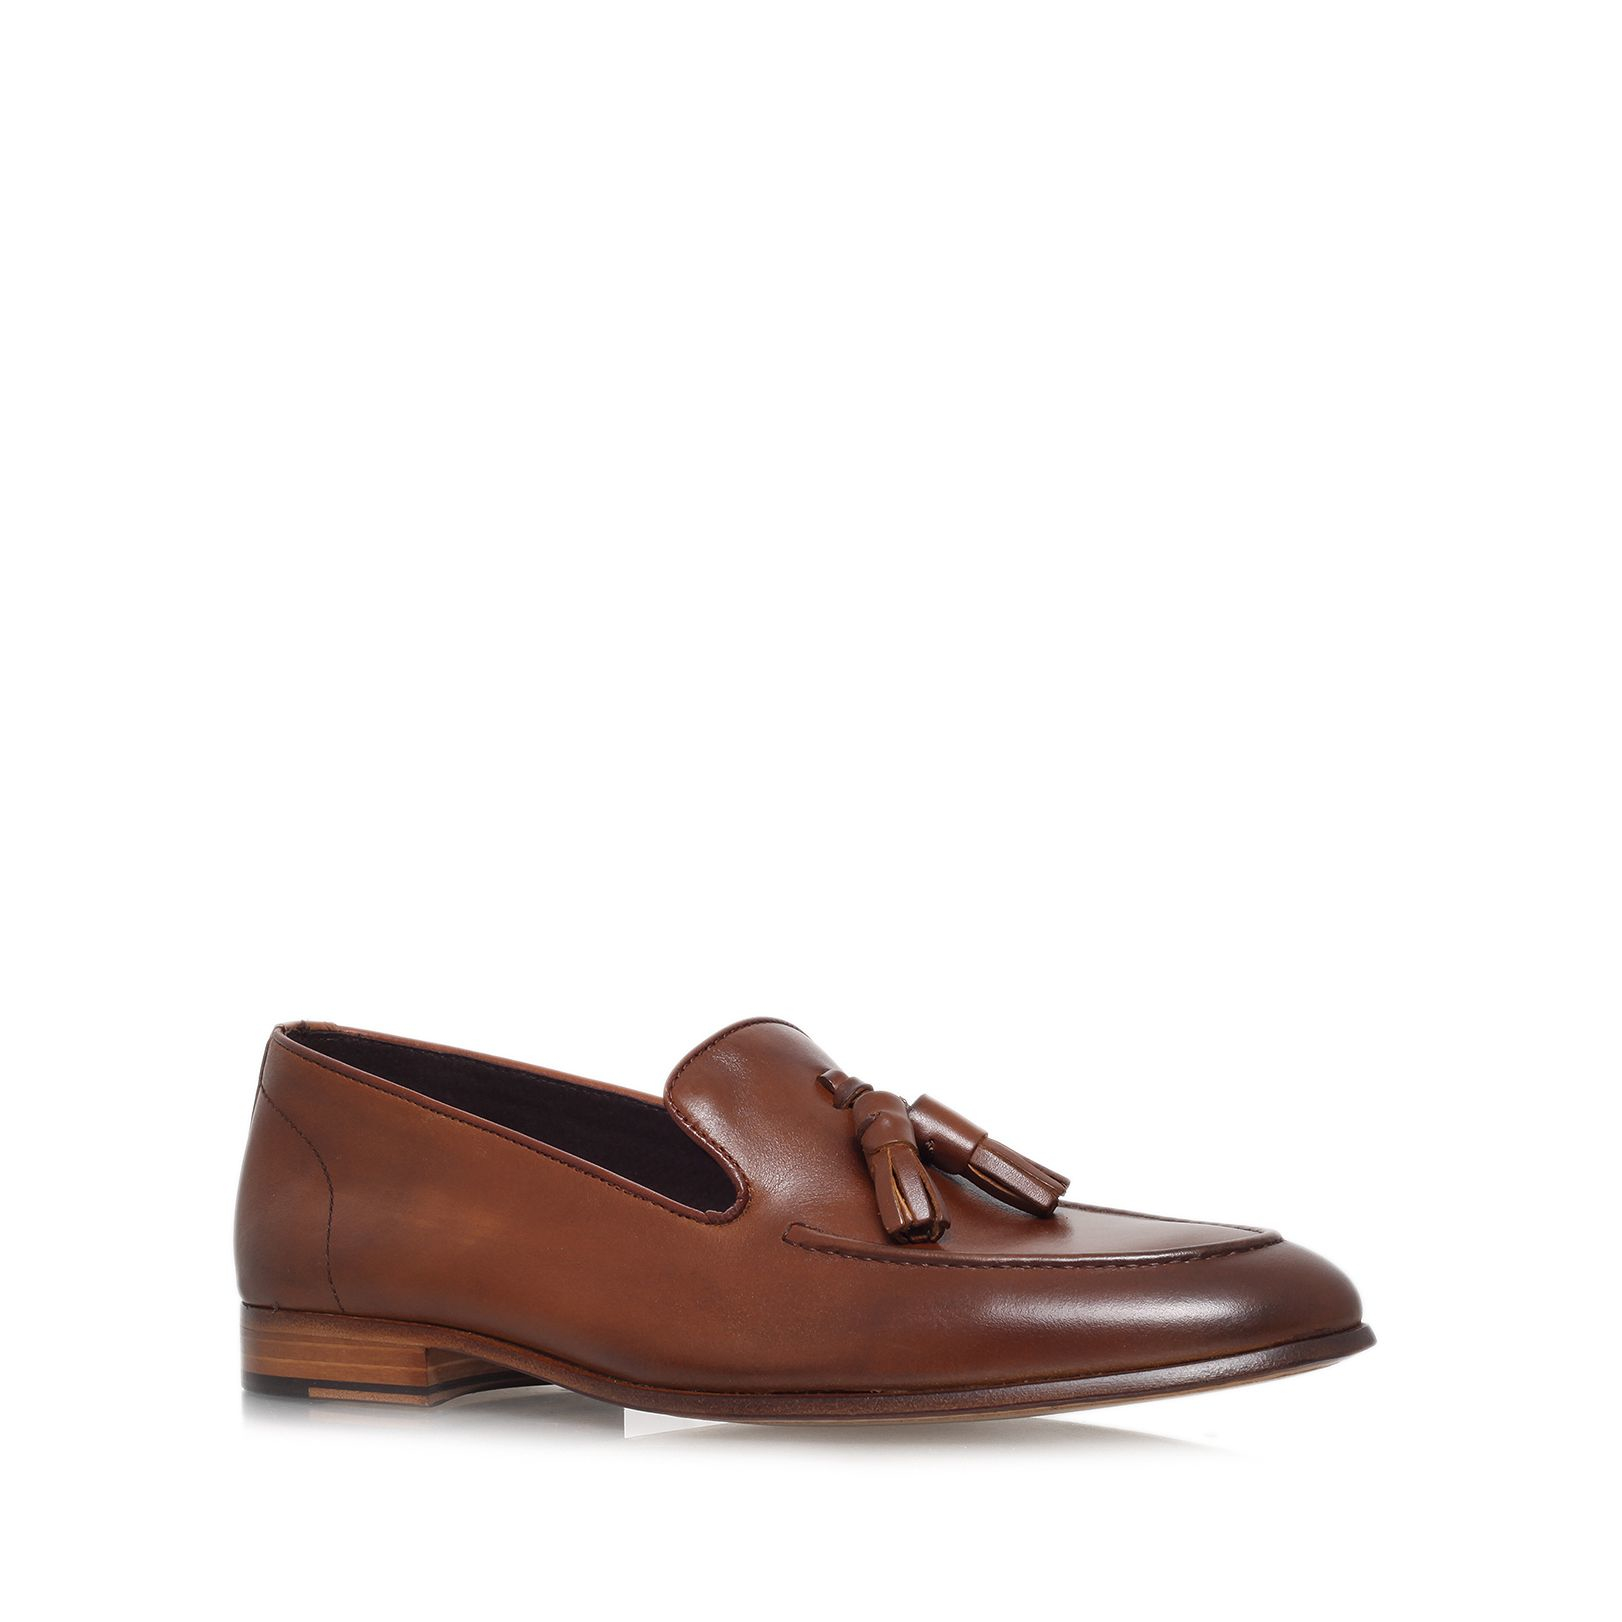 Kurt Geiger Leather Alessandro Loafer Shoes in Tan (Brown) for Men - Lyst